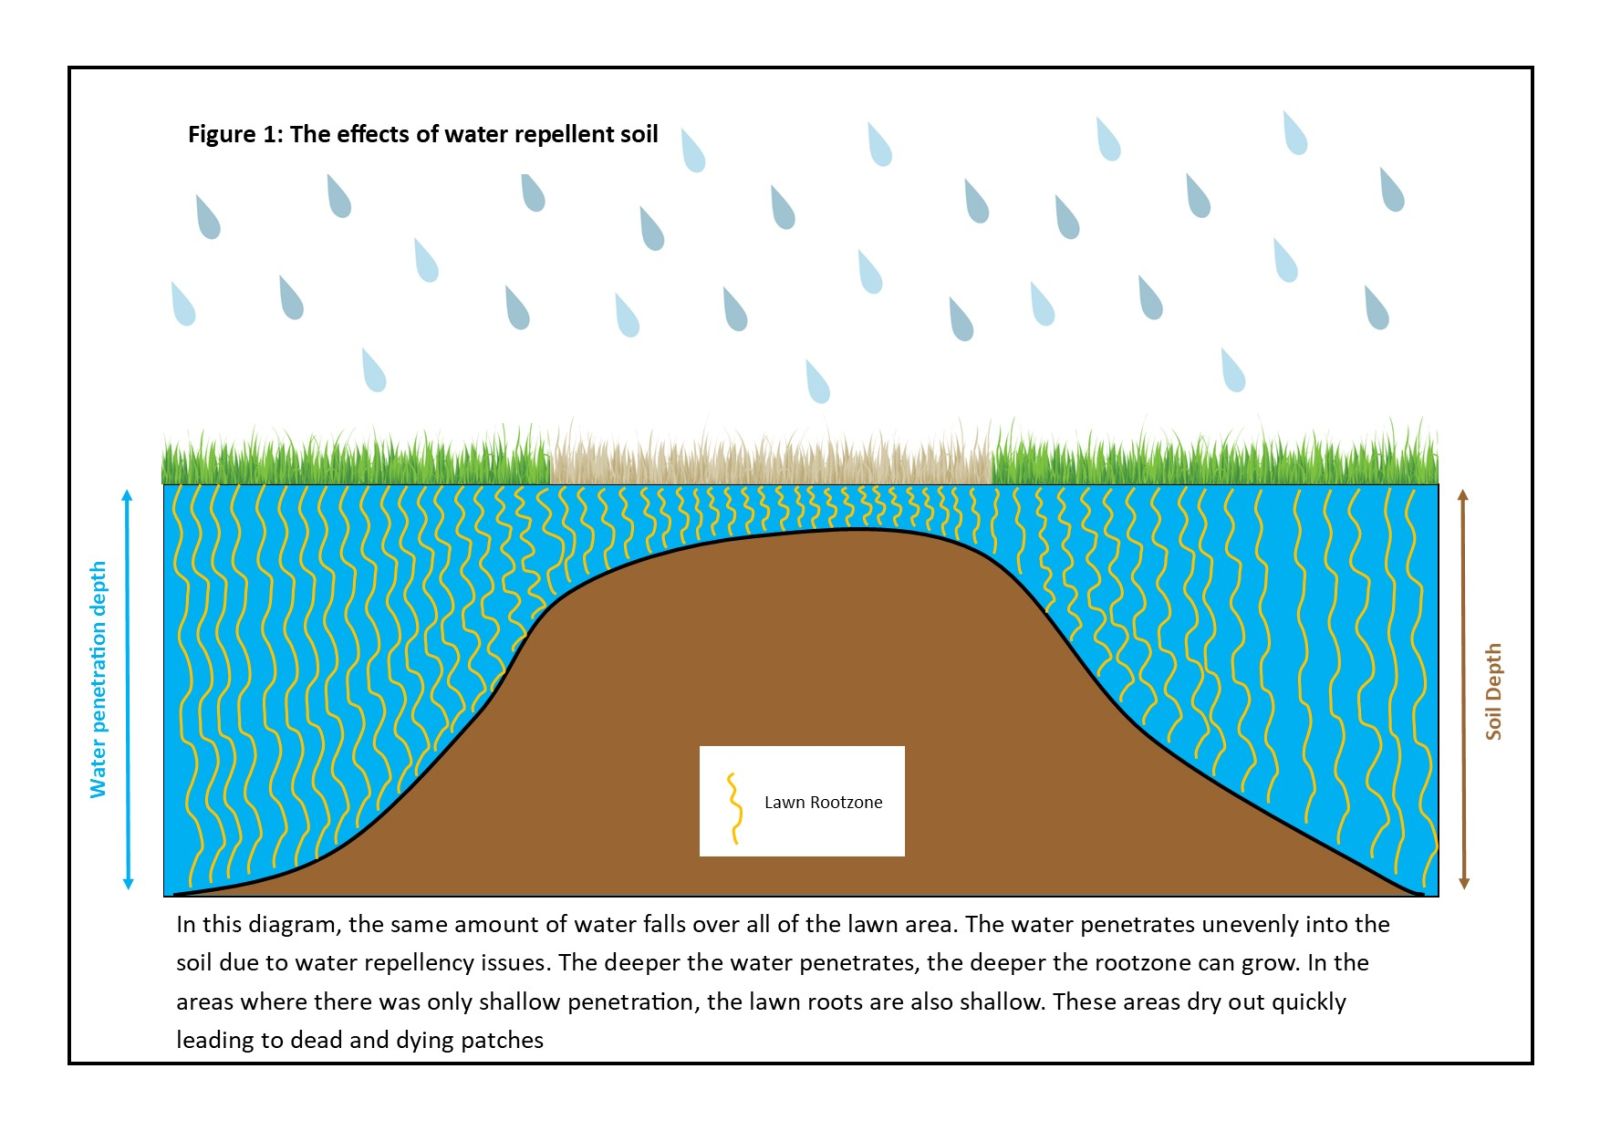 Paul Munns Blog Solve my Problem Category Water repellent soil